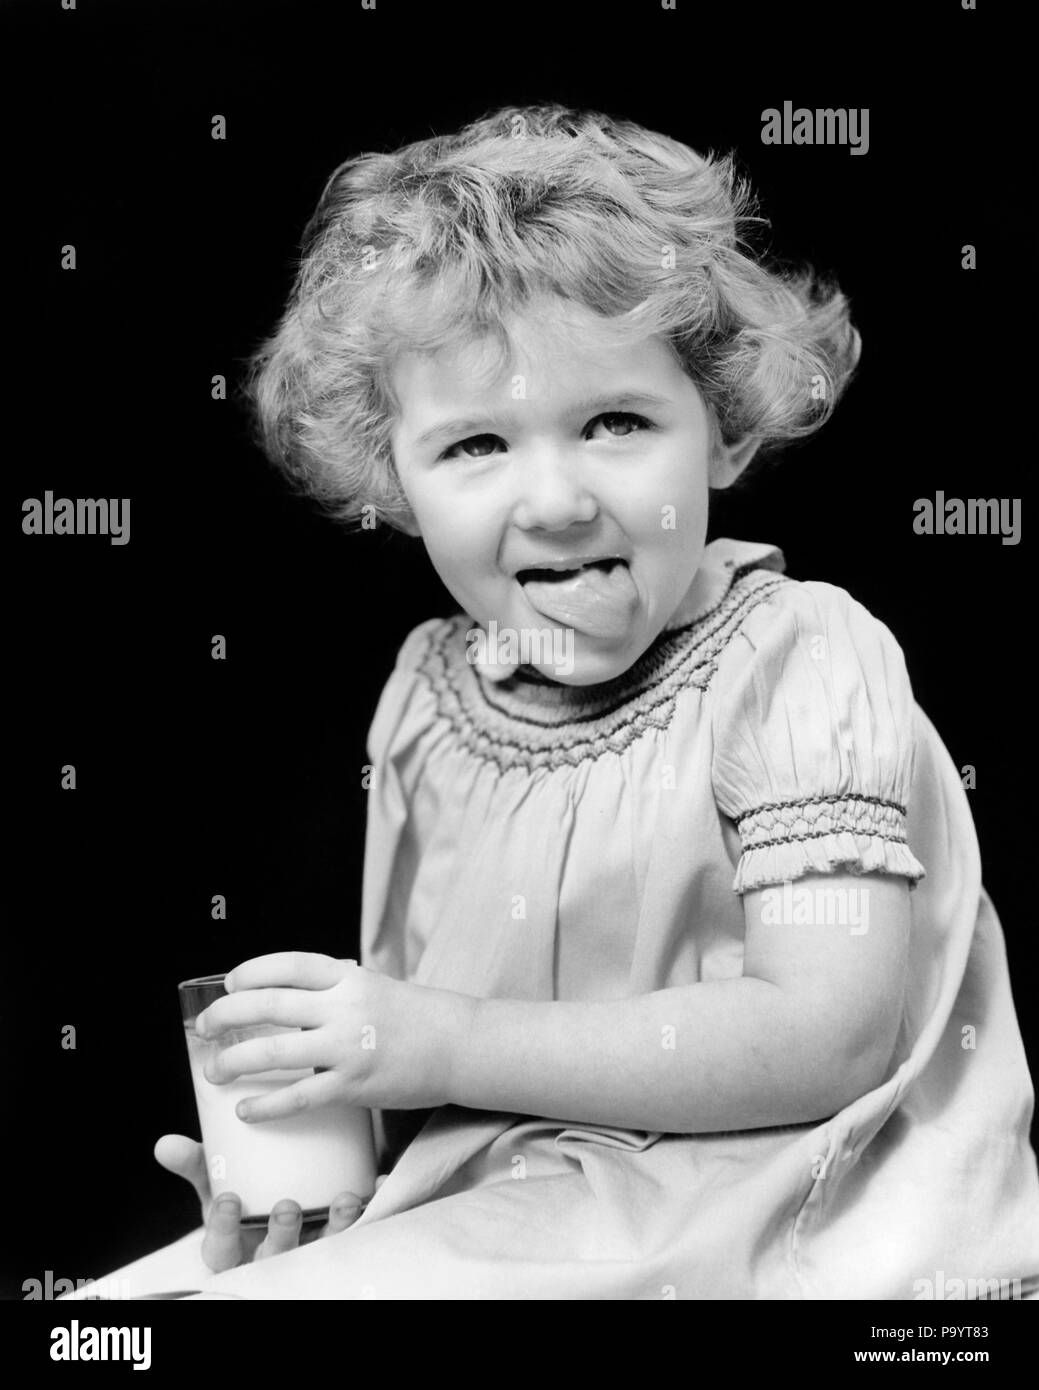 1920s 1930s SMILING LITTLE GIRL CURLY SHORT HAIR HOLDING GLASS OF MILK LOOKING AT CAMERA LICKING HER LIPS WITH TONGUE DELICIOUS - f524 HAR001 HARS EXPRESSIONS B&W EYE CONTACT LICKING HAPPINESS BEVERAGE STRENGTH CURLY NOURISHMENT GROWTH JUVENILES TASTY BLACK AND WHITE CAUCASIAN ETHNICITY DELICIOUS HAR001 OLD FASHIONED Stock Photo